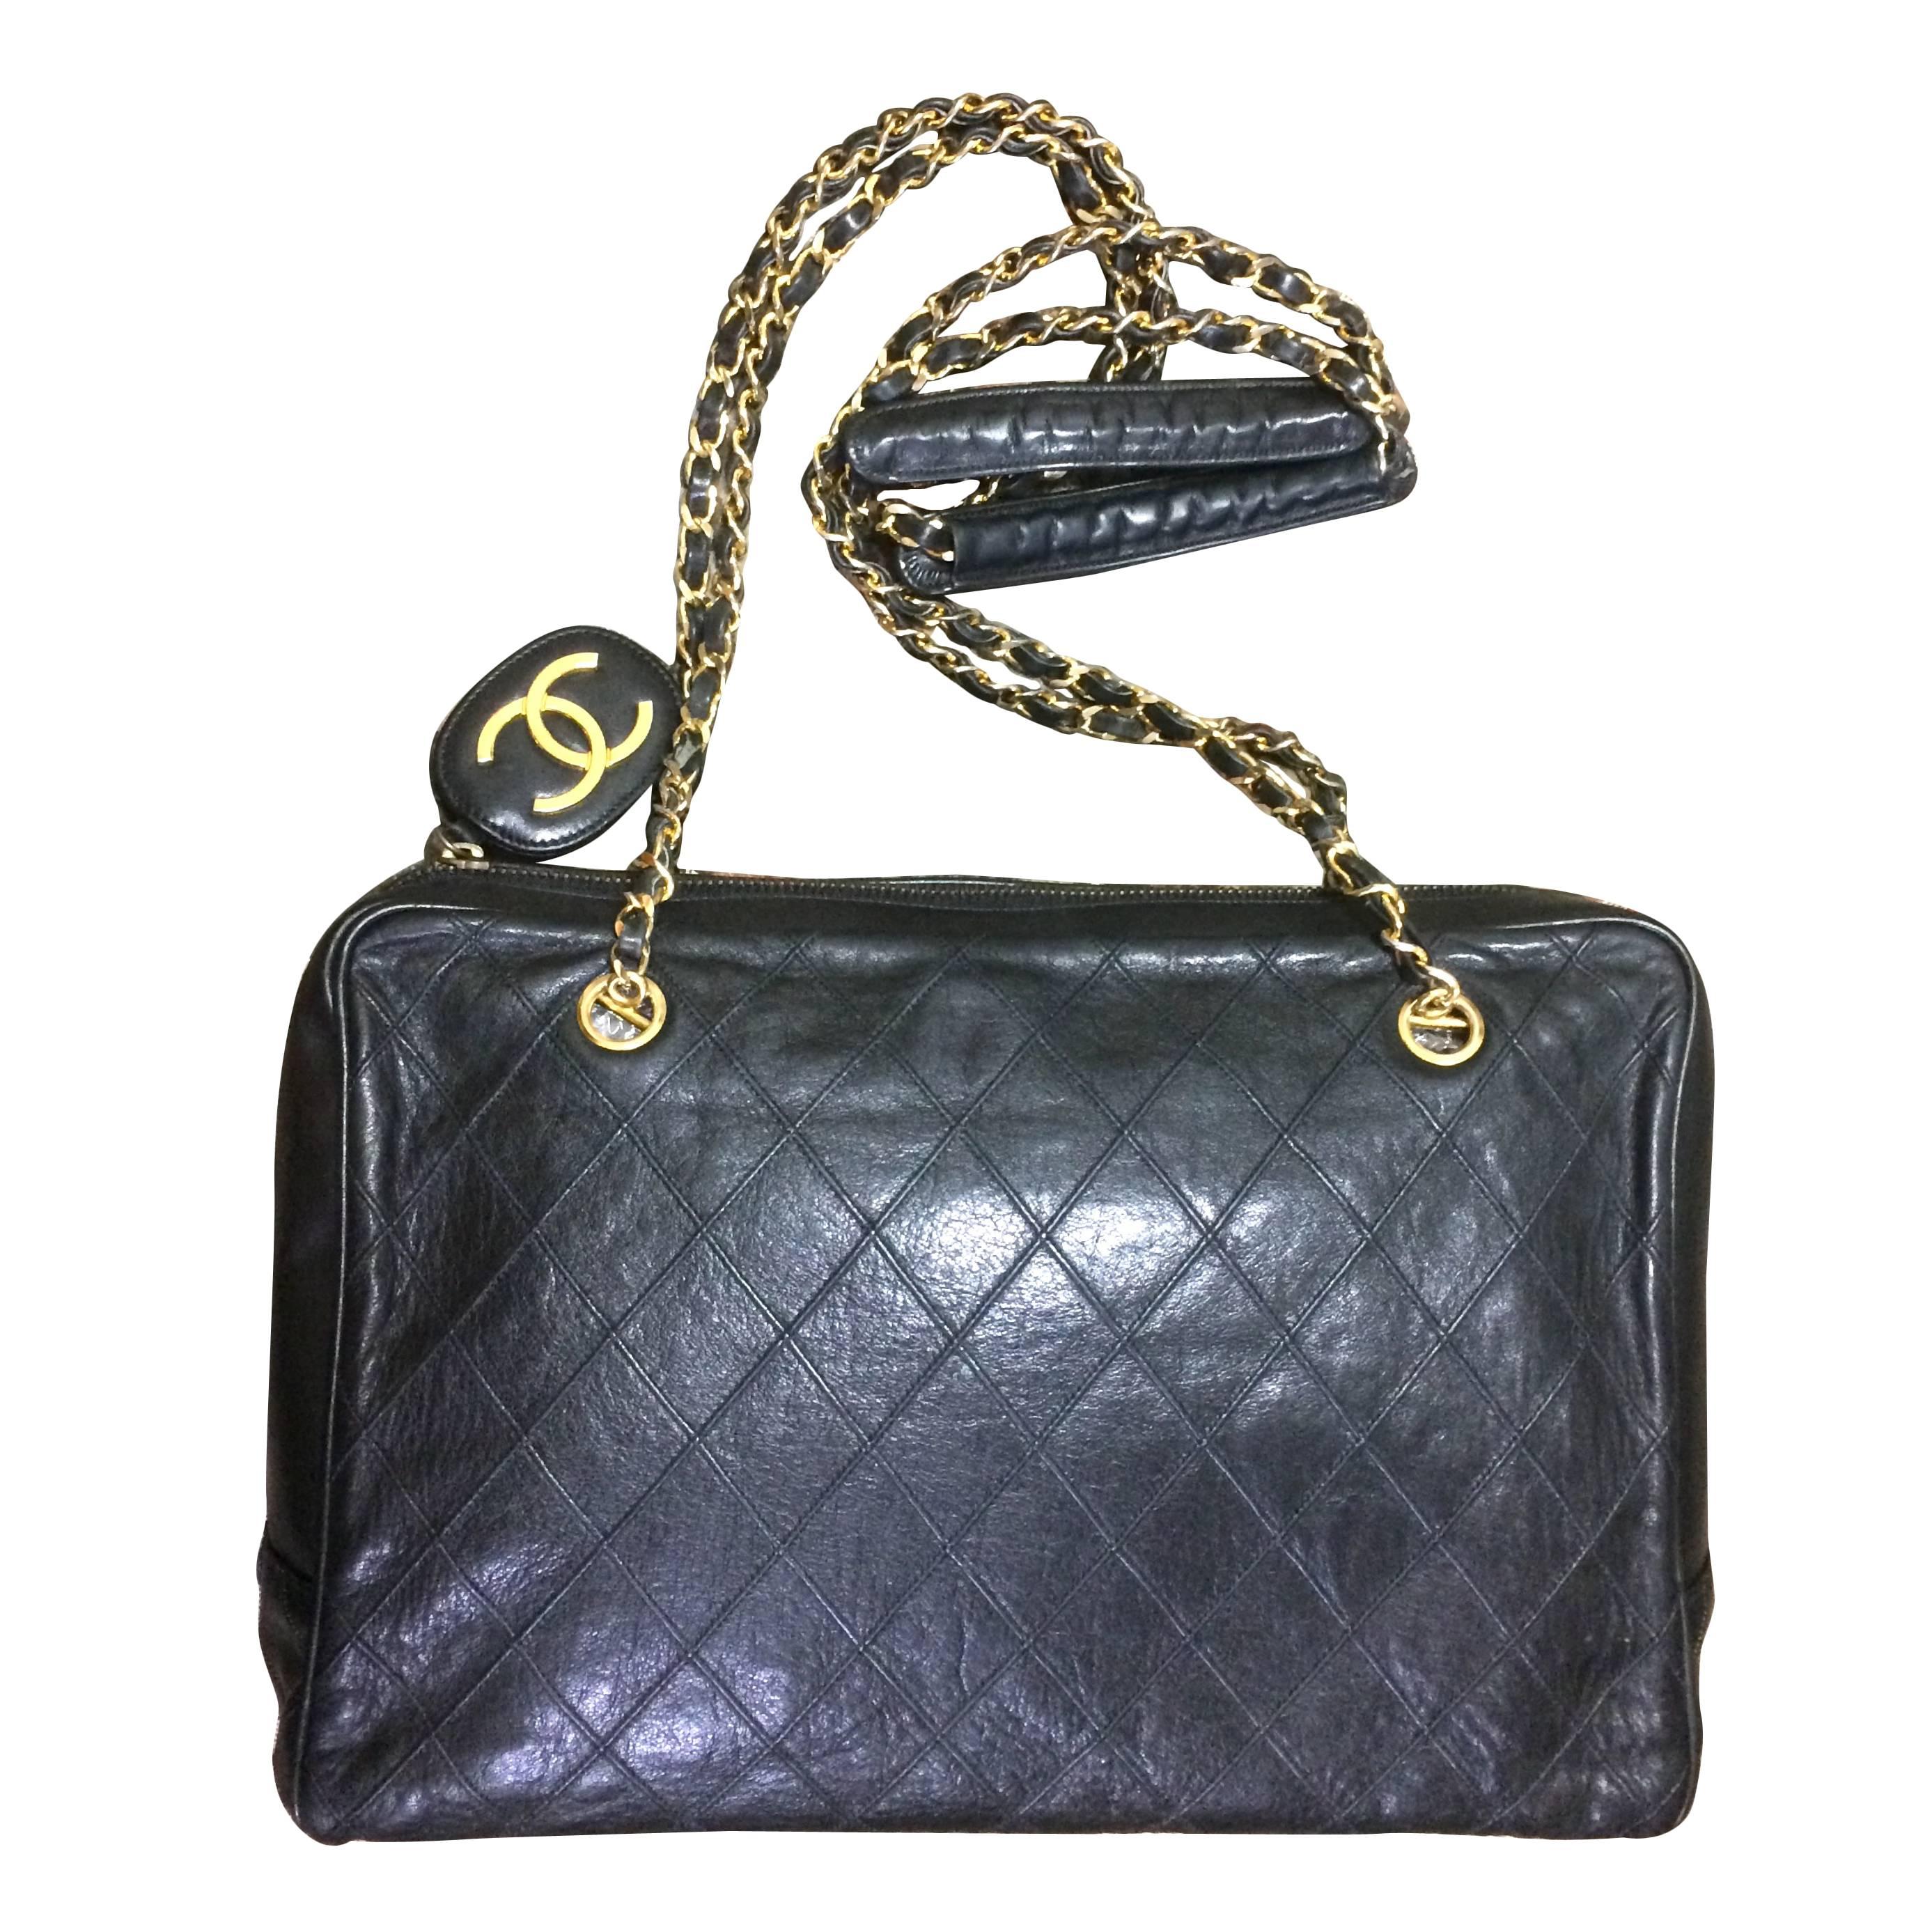 Vintage CHANEL black goatskin shoulder bag with gold tone chains and cc charm. For Sale